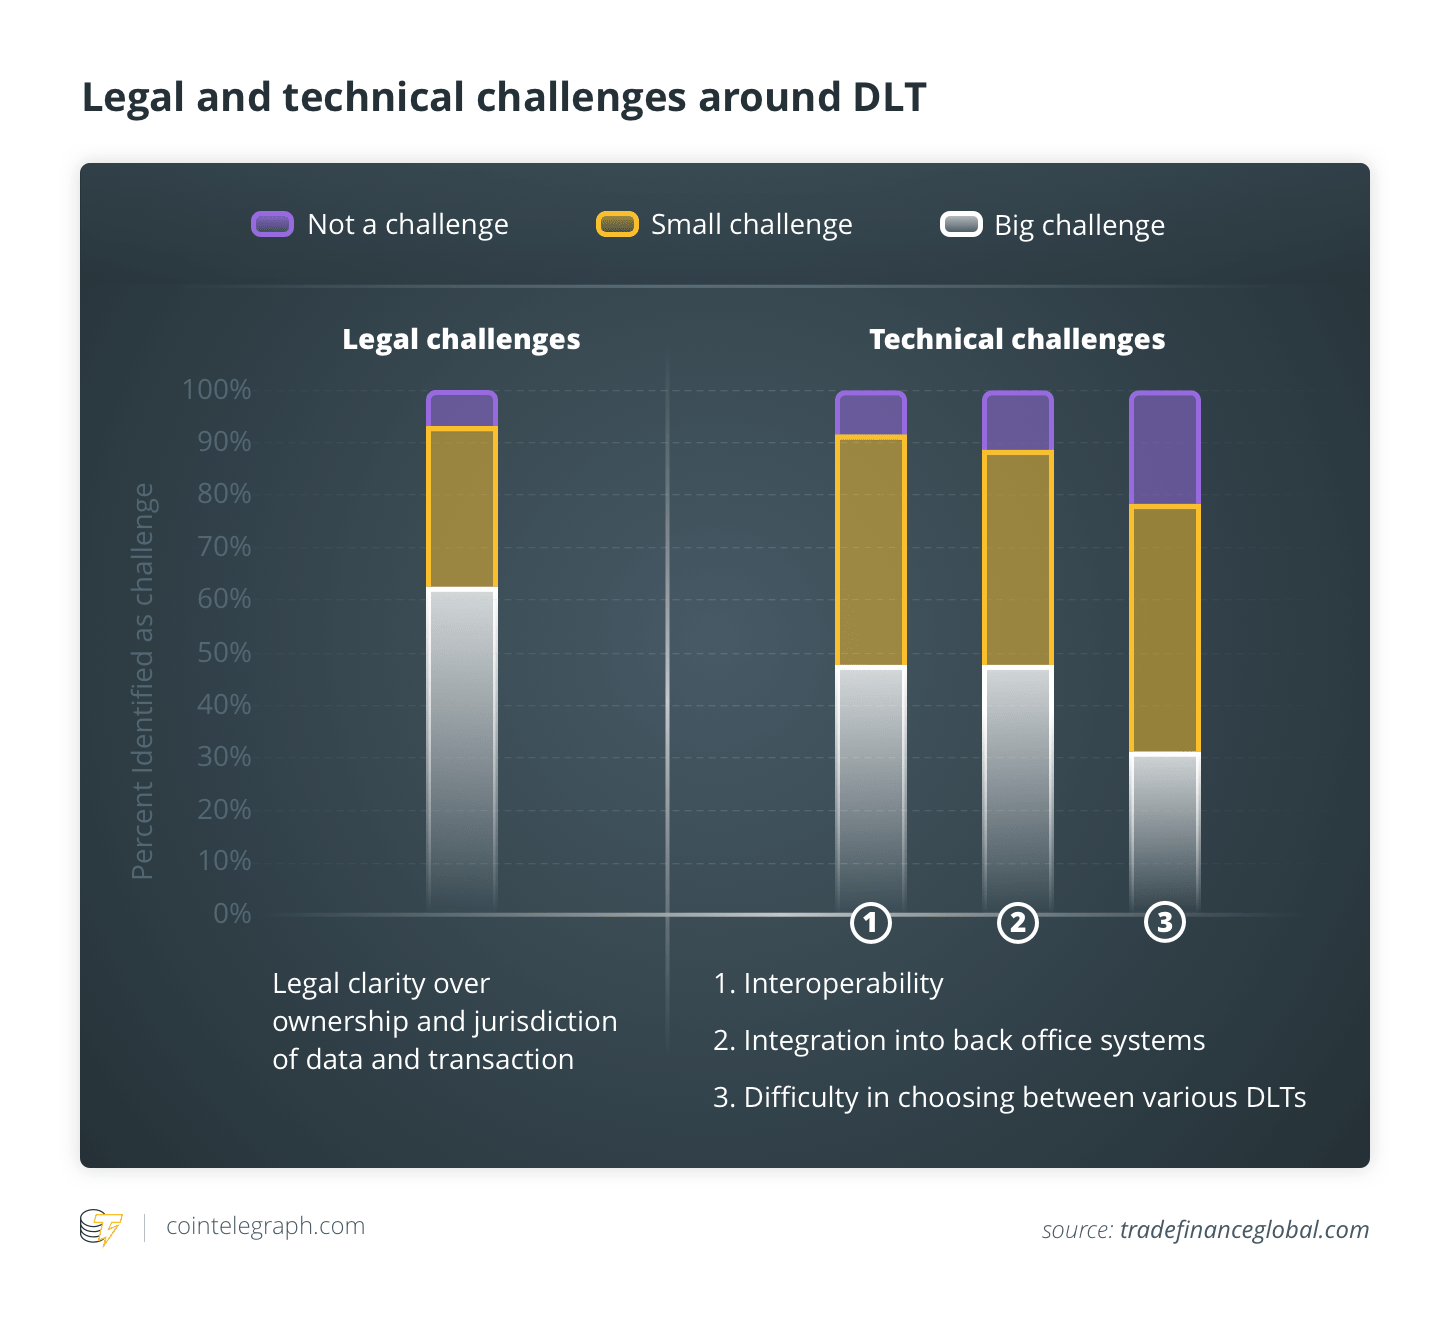 Legal and technical challenges around DLT